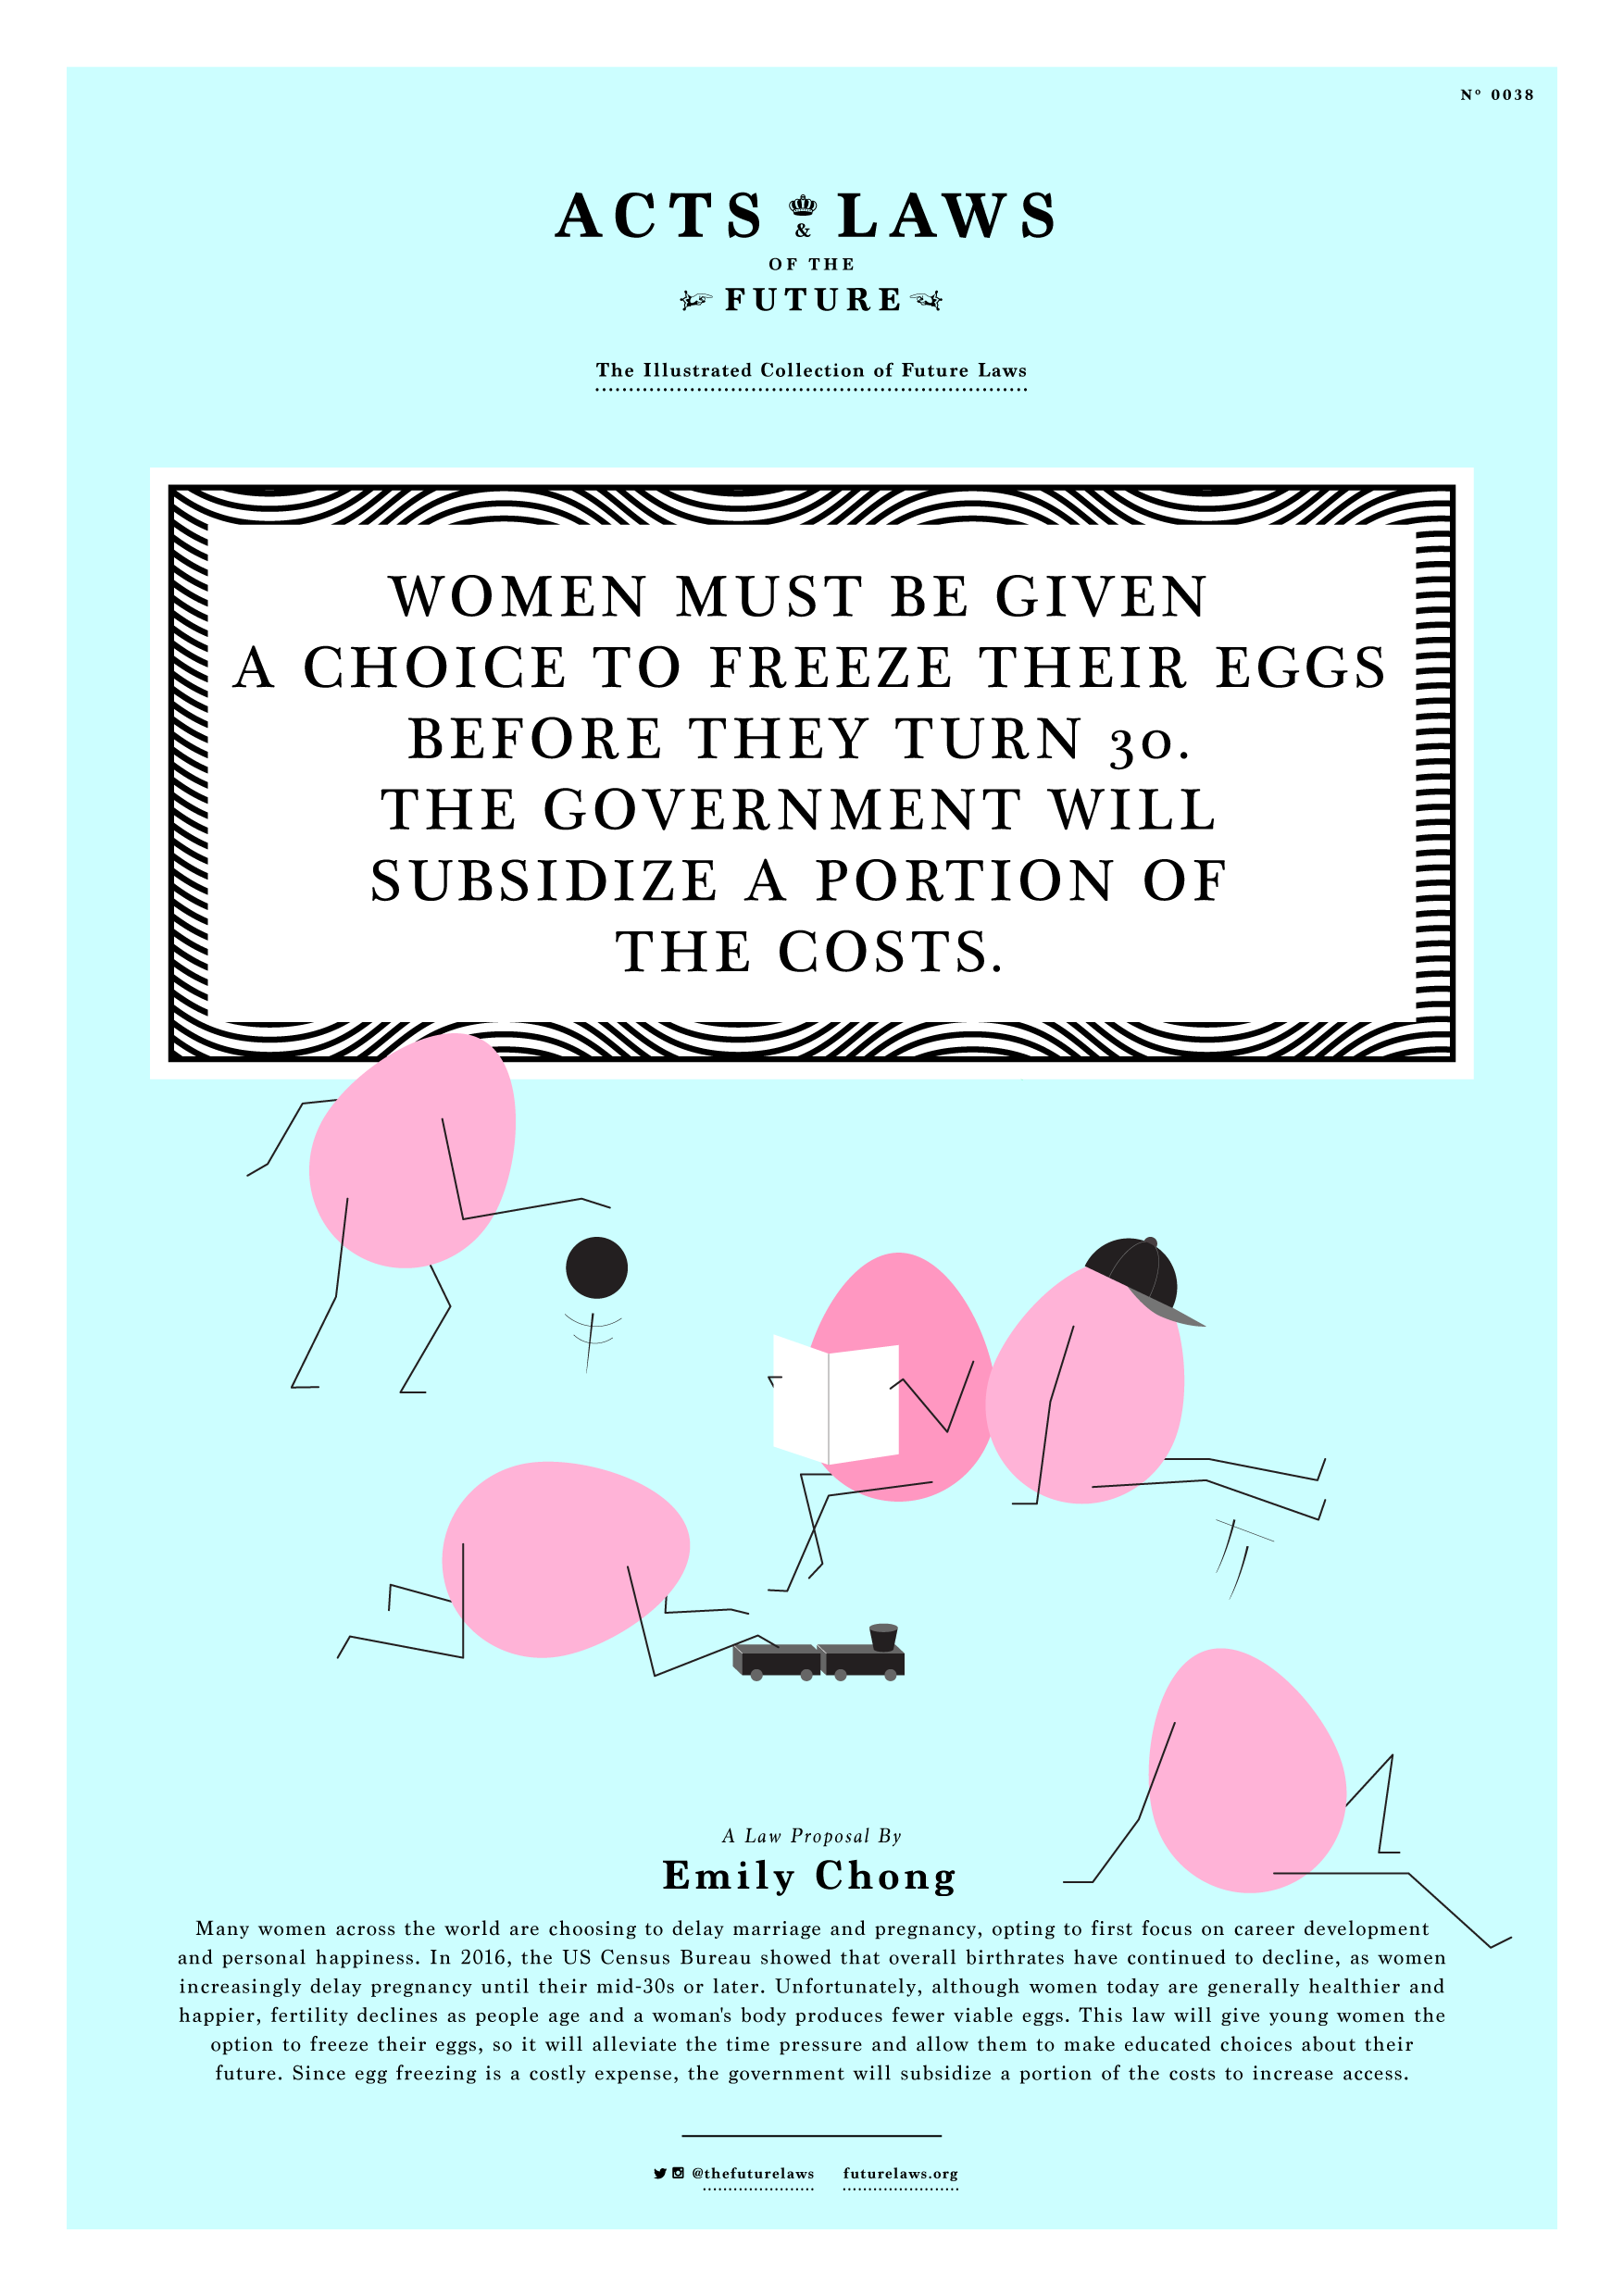 Women must be given a choice to freeze their eggs before they turn 30. The government will subsidize a portion of the costs.